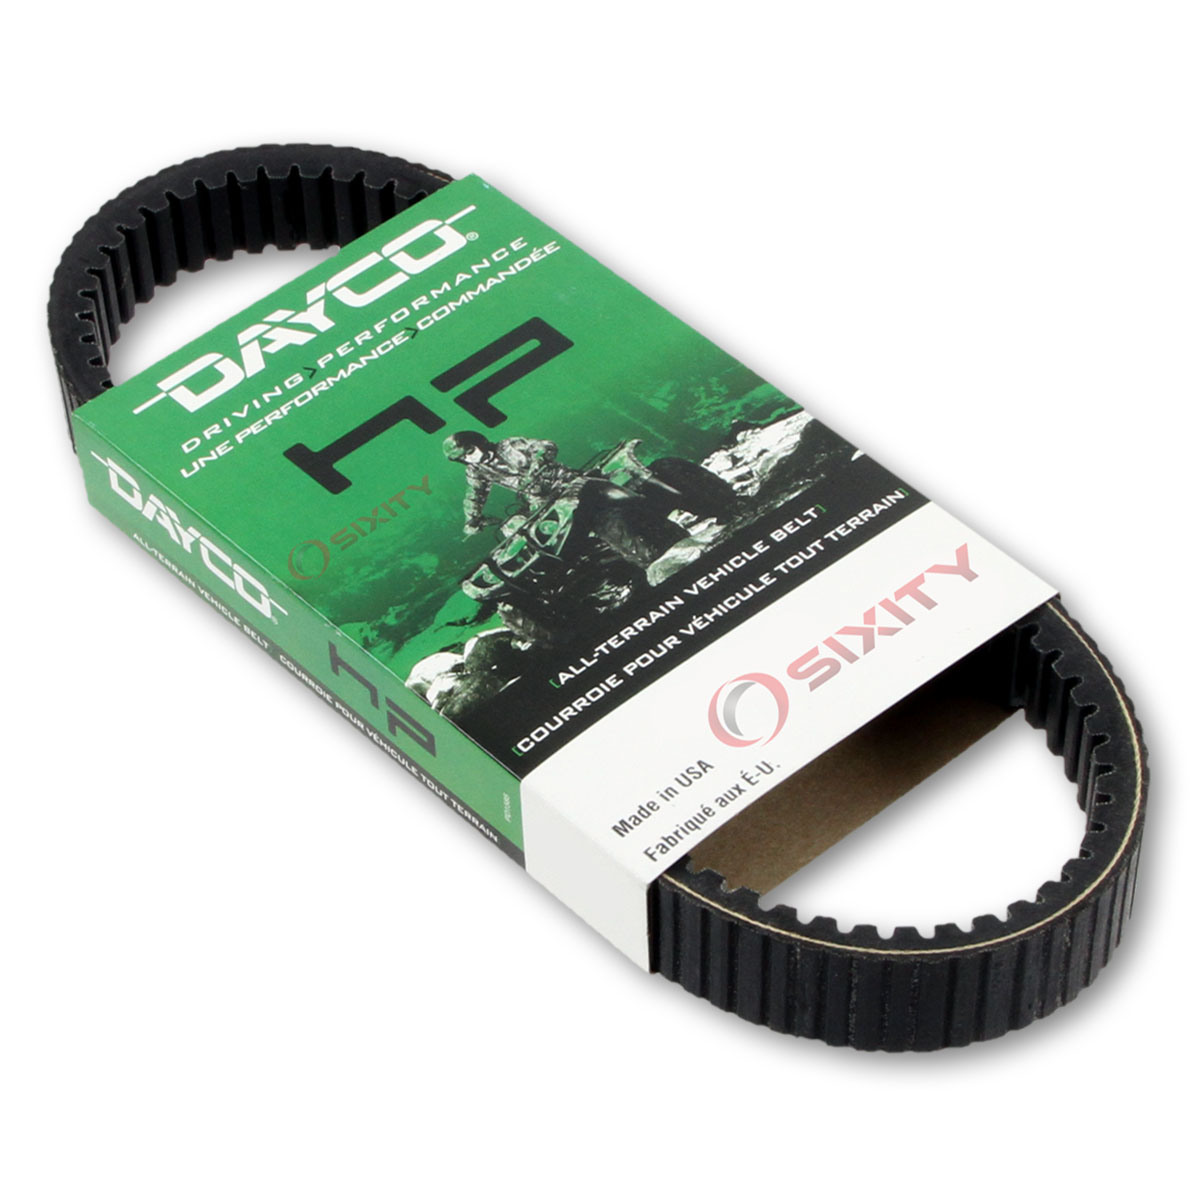 Dayco HP Drive Belt for 2003-2008 Arctic Cat 500 4x4 Auto TRV